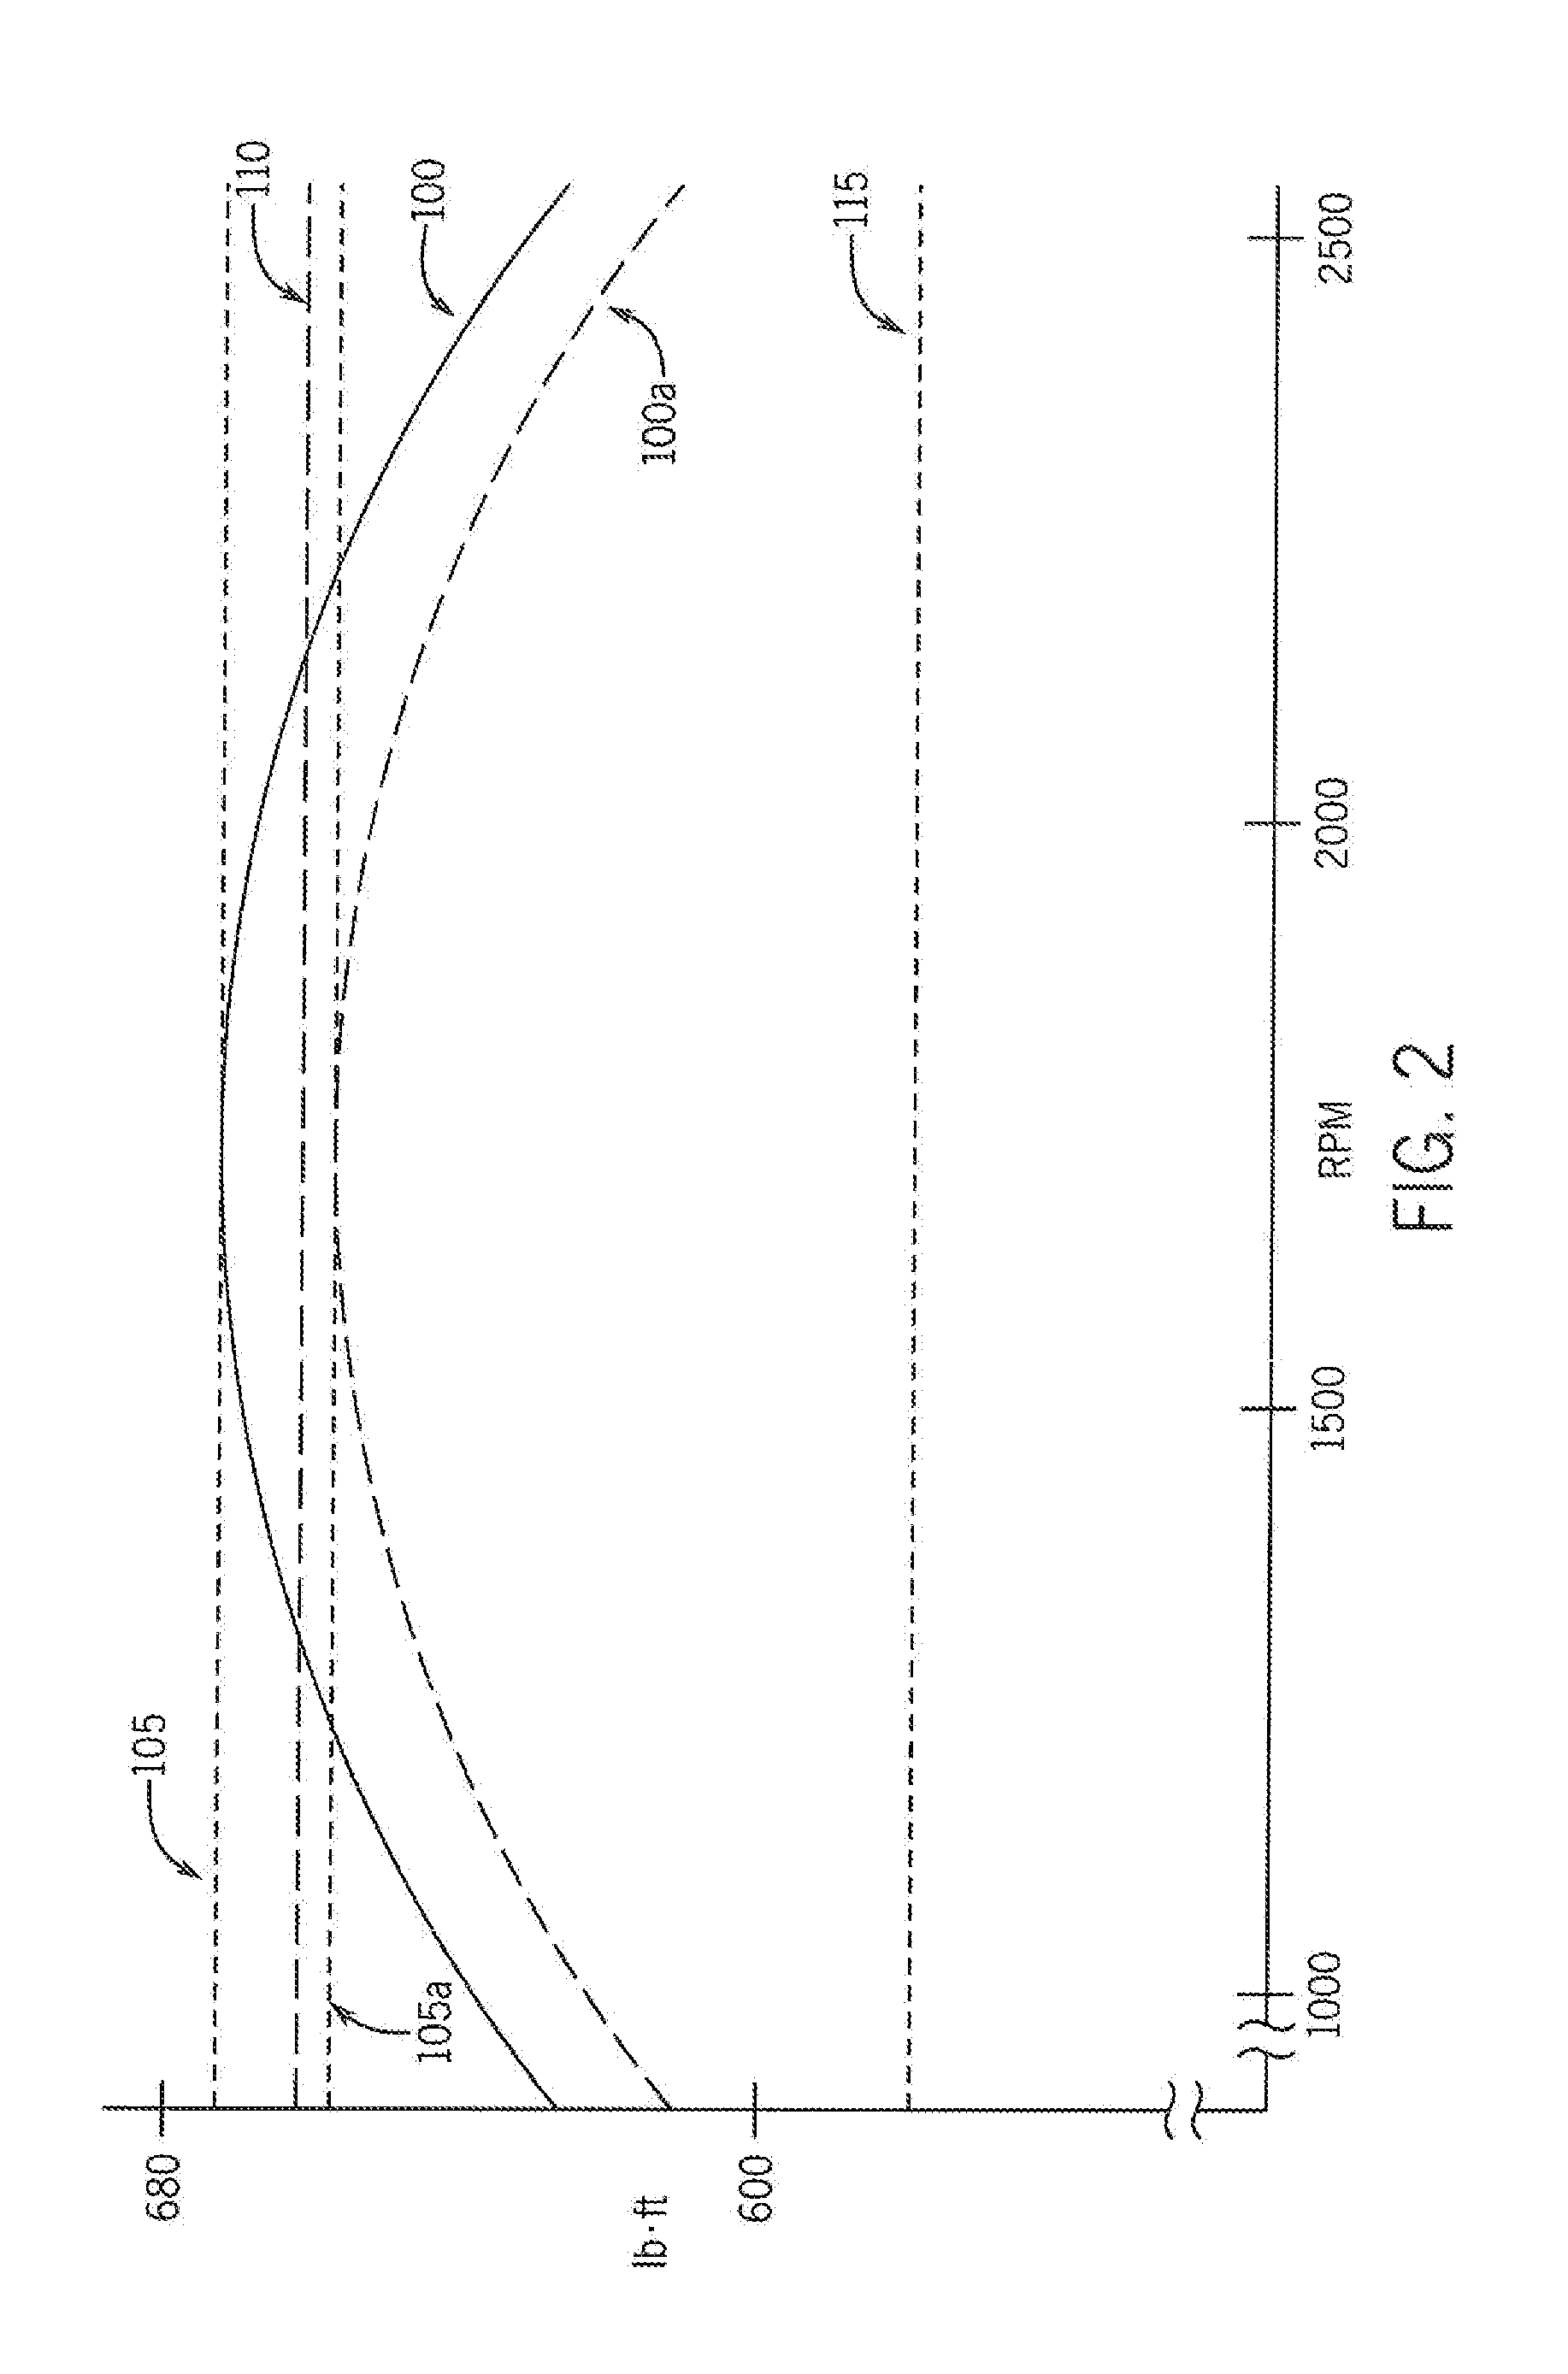 Self-Propelled Off-Road Vehicle With System For Torque Control At Shift Points